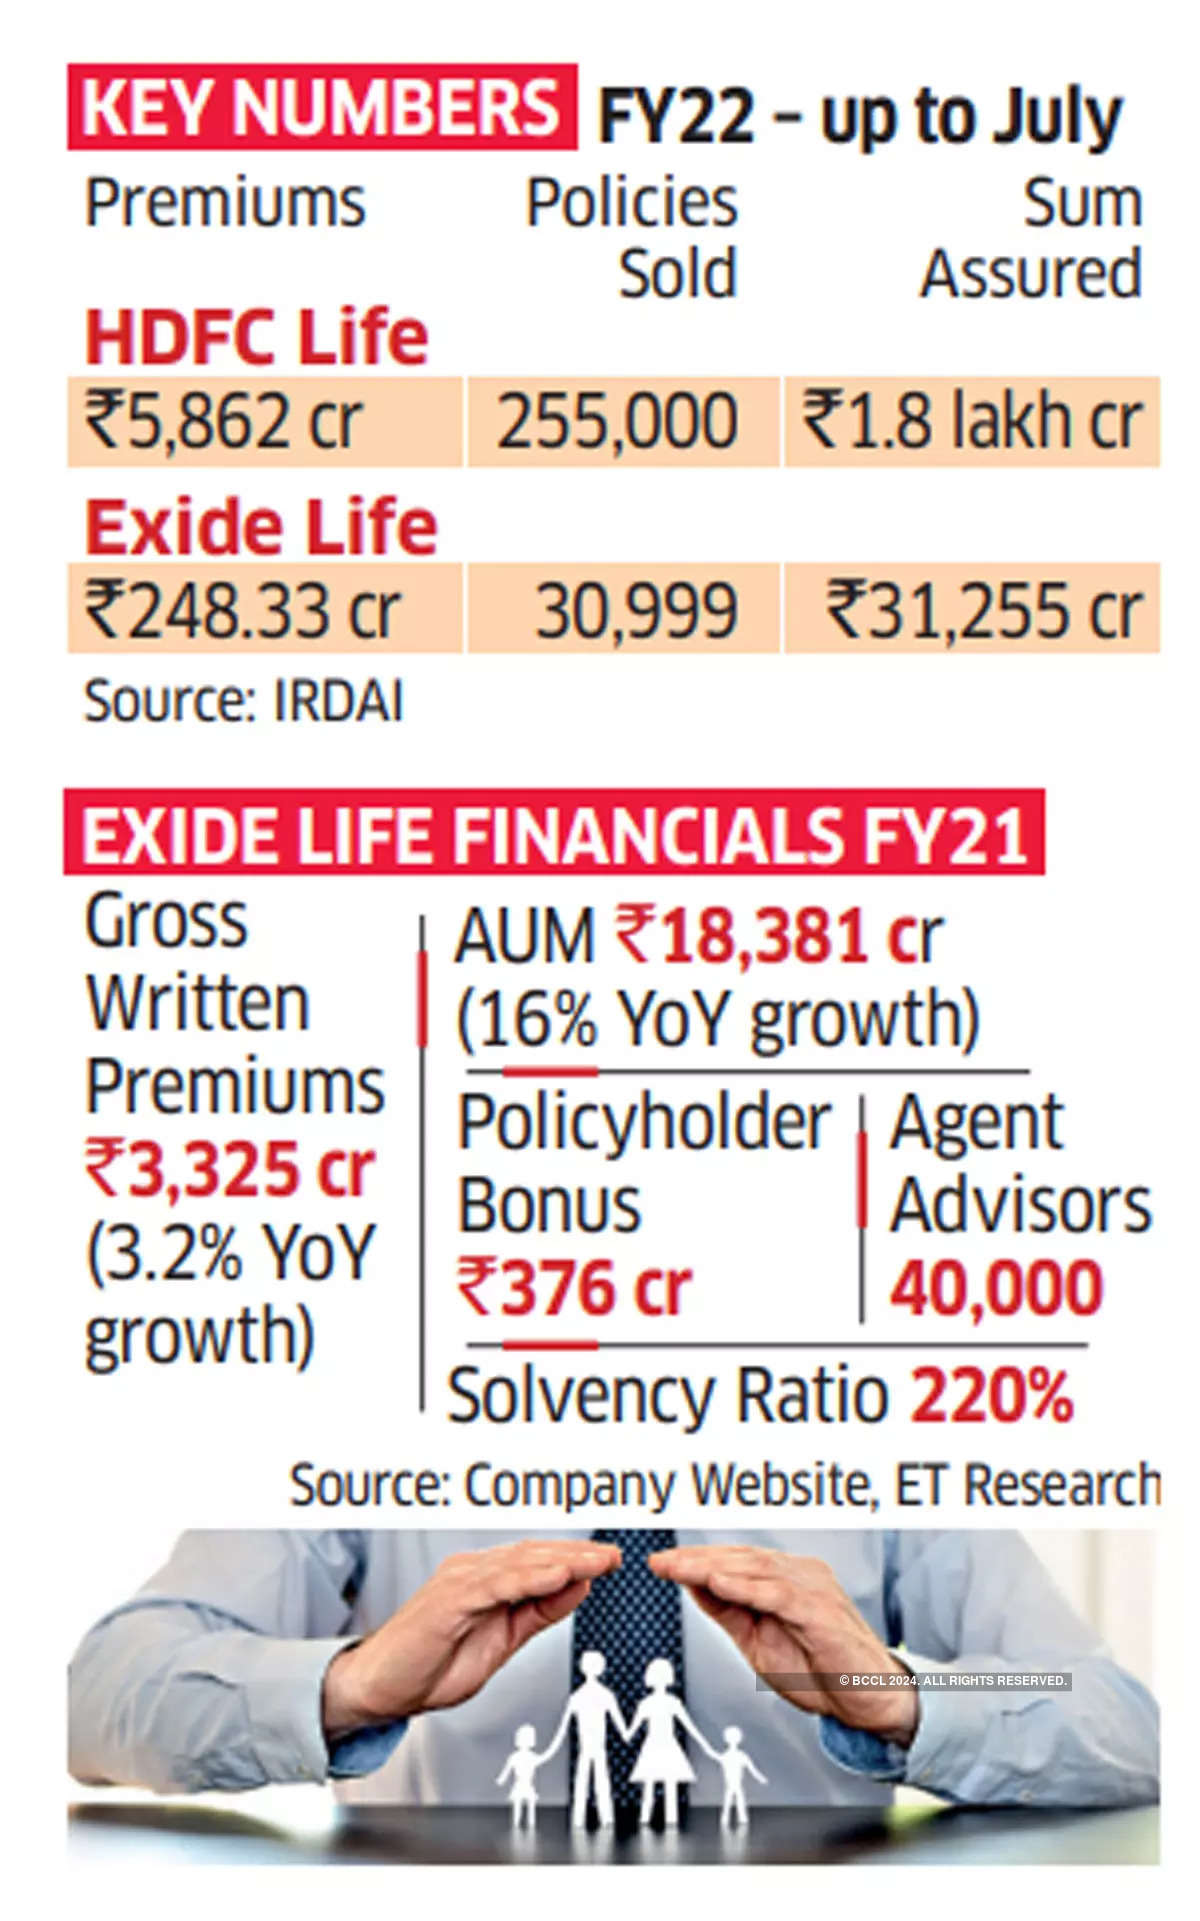 Hdfc Life Hdfc Life Acquires Exide Life In A Deal Worth Rs 6687 Crore The Economic Times 0574